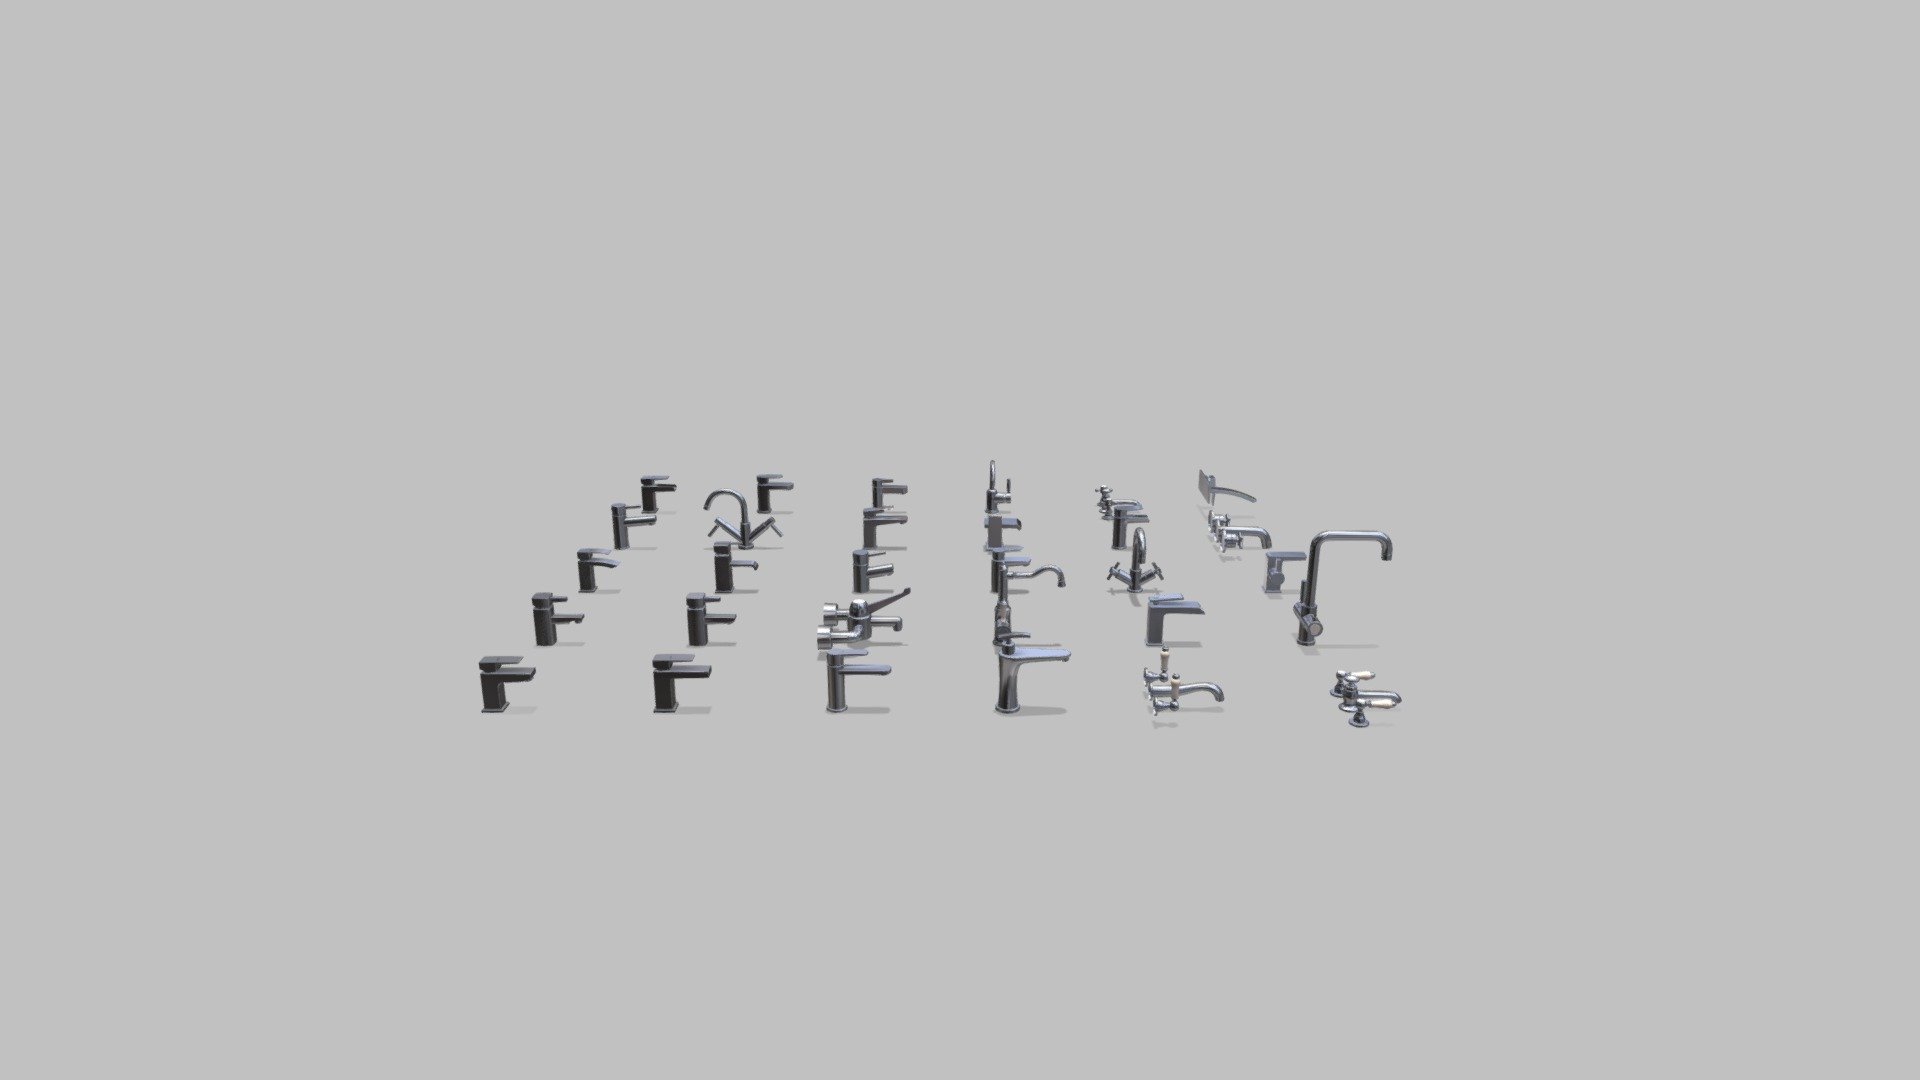 Enjoy!

Poly count: About 5000 polys, 2600 verts per shape (these values are average)

Features:
- Rigged (Blender, Unreal Engine)
- 5 procedural PBR materials: Polished Chrome, Pure Chrome, Polished Bronze, Solid Brass, White Marble
- .BLEND file contains models with unapplied triangulate modifier
- UV mapping (mixed) - (FREE) Interior Pack - 30 BASIN TAPS Low-poly - 3D model by UIysses 3d model